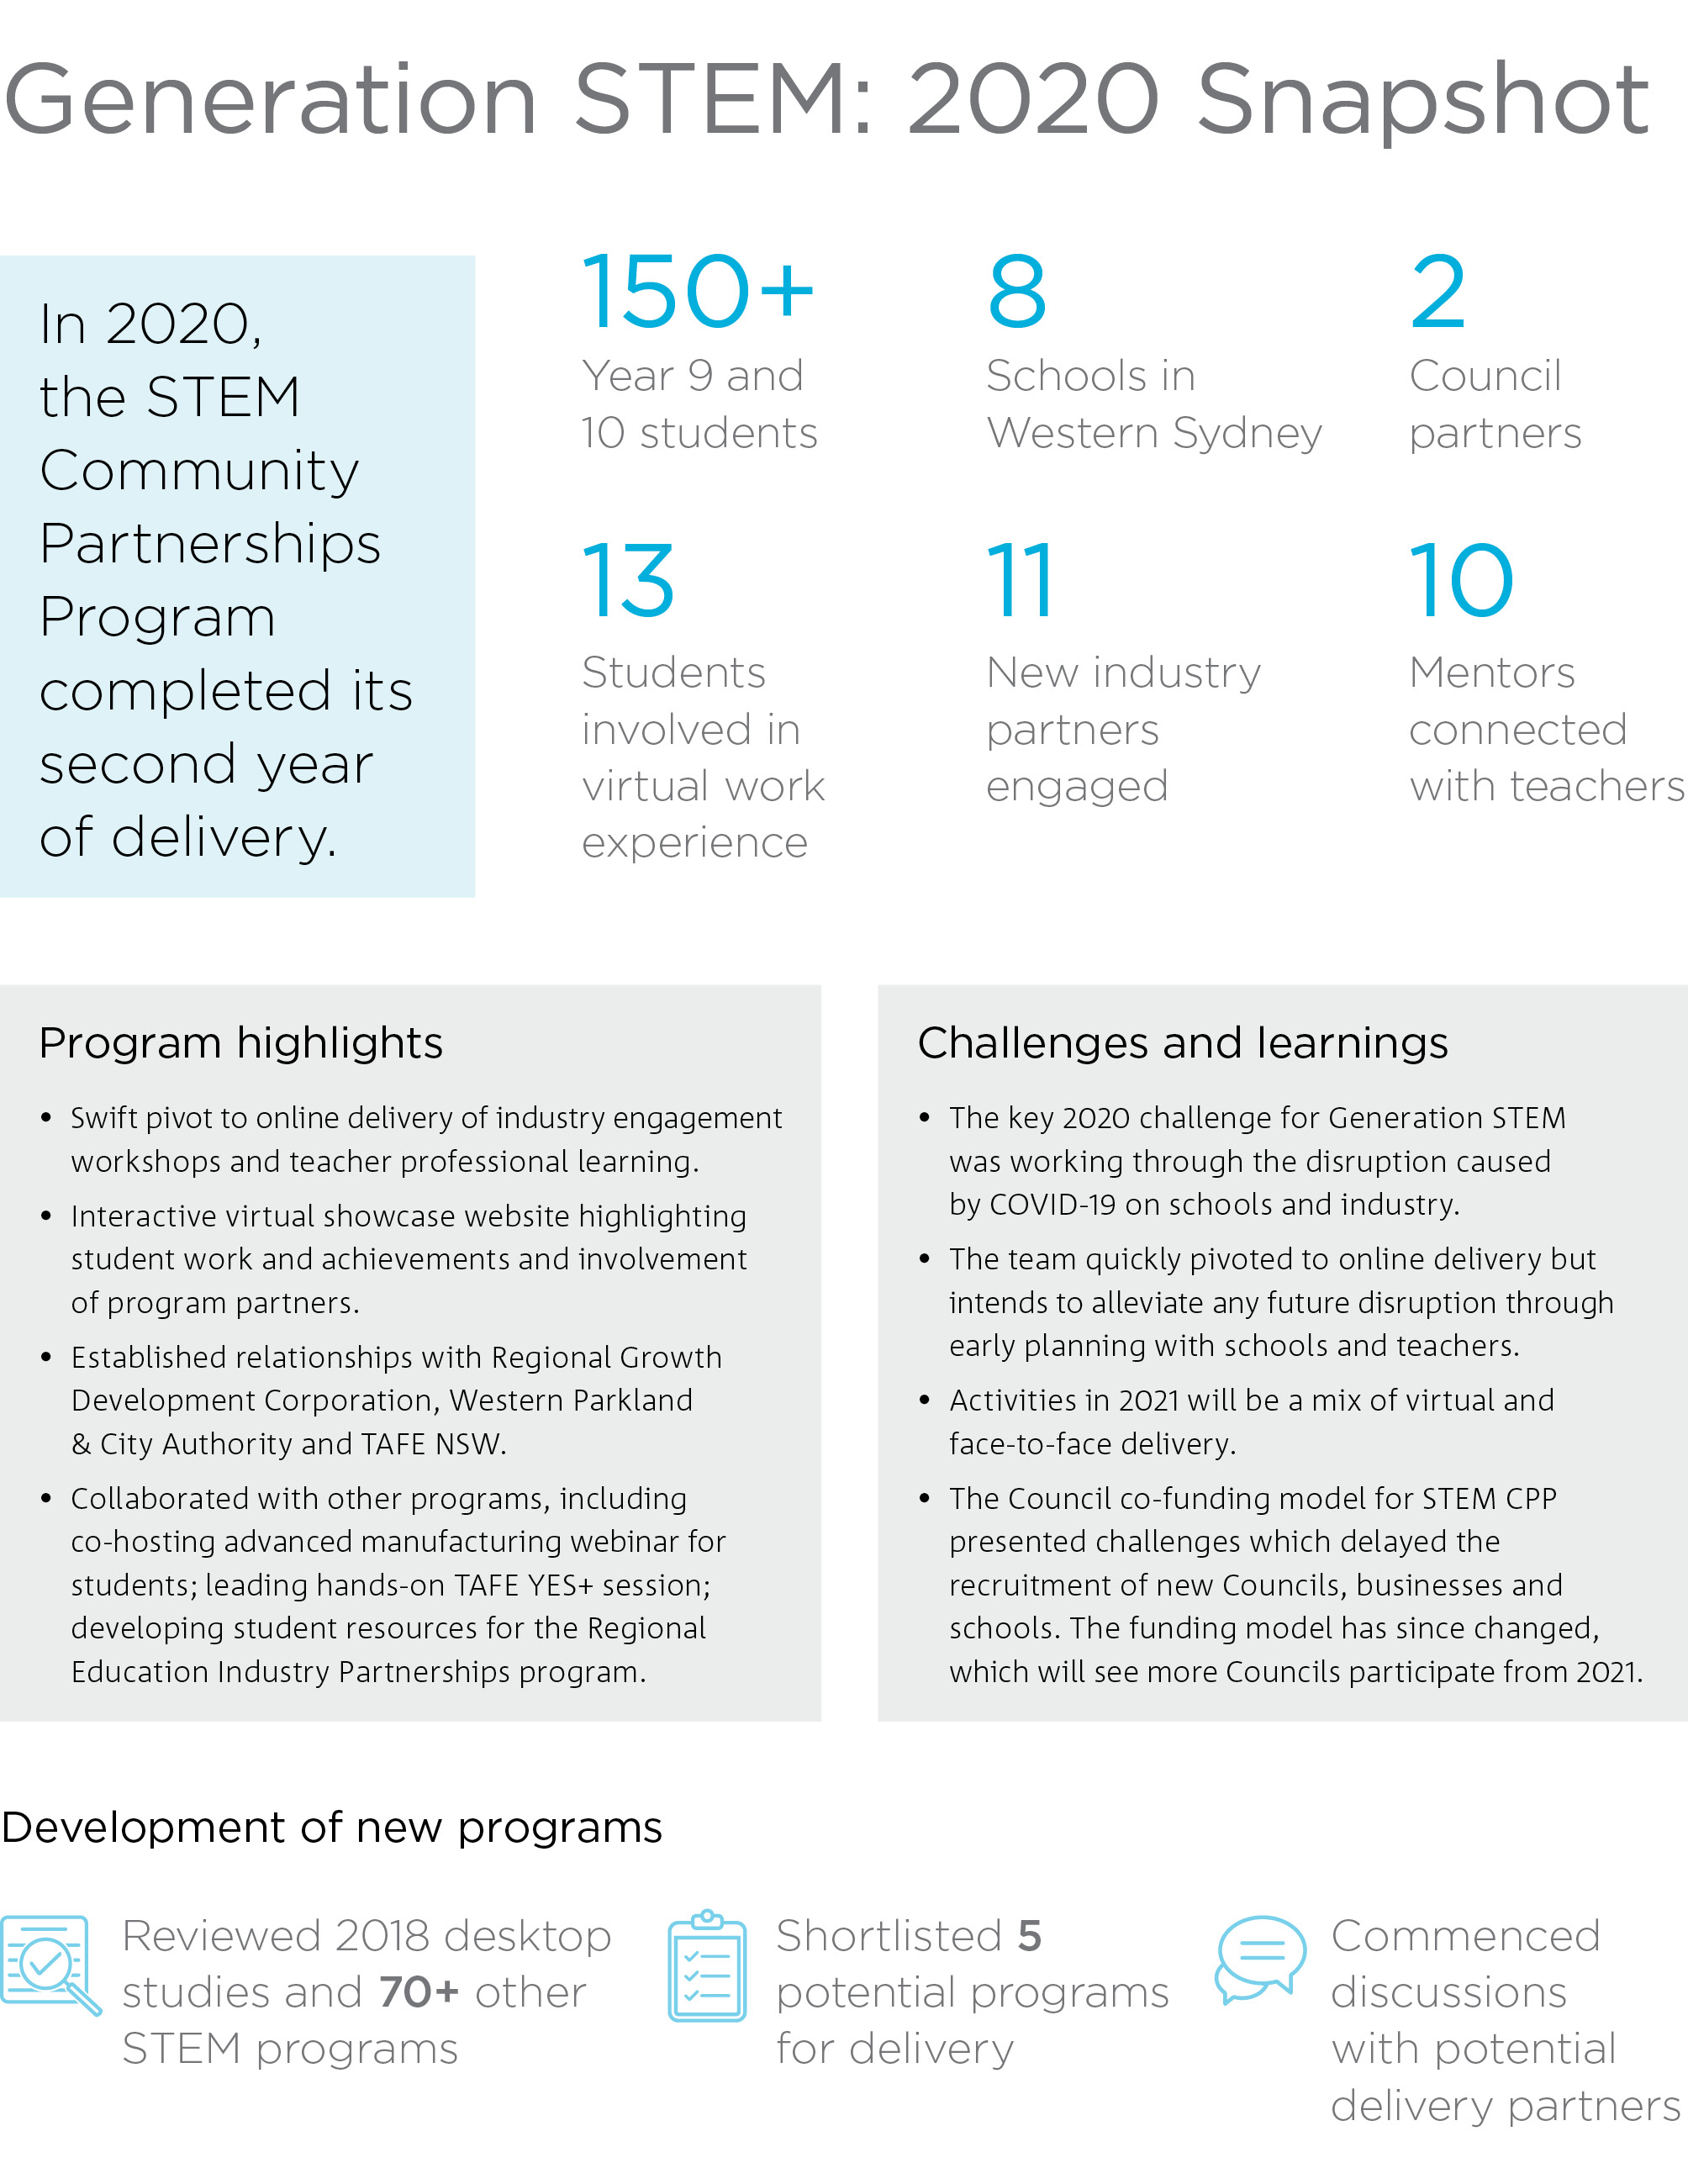 A snapshot of the key highlights, challenge and learnings from 2020.